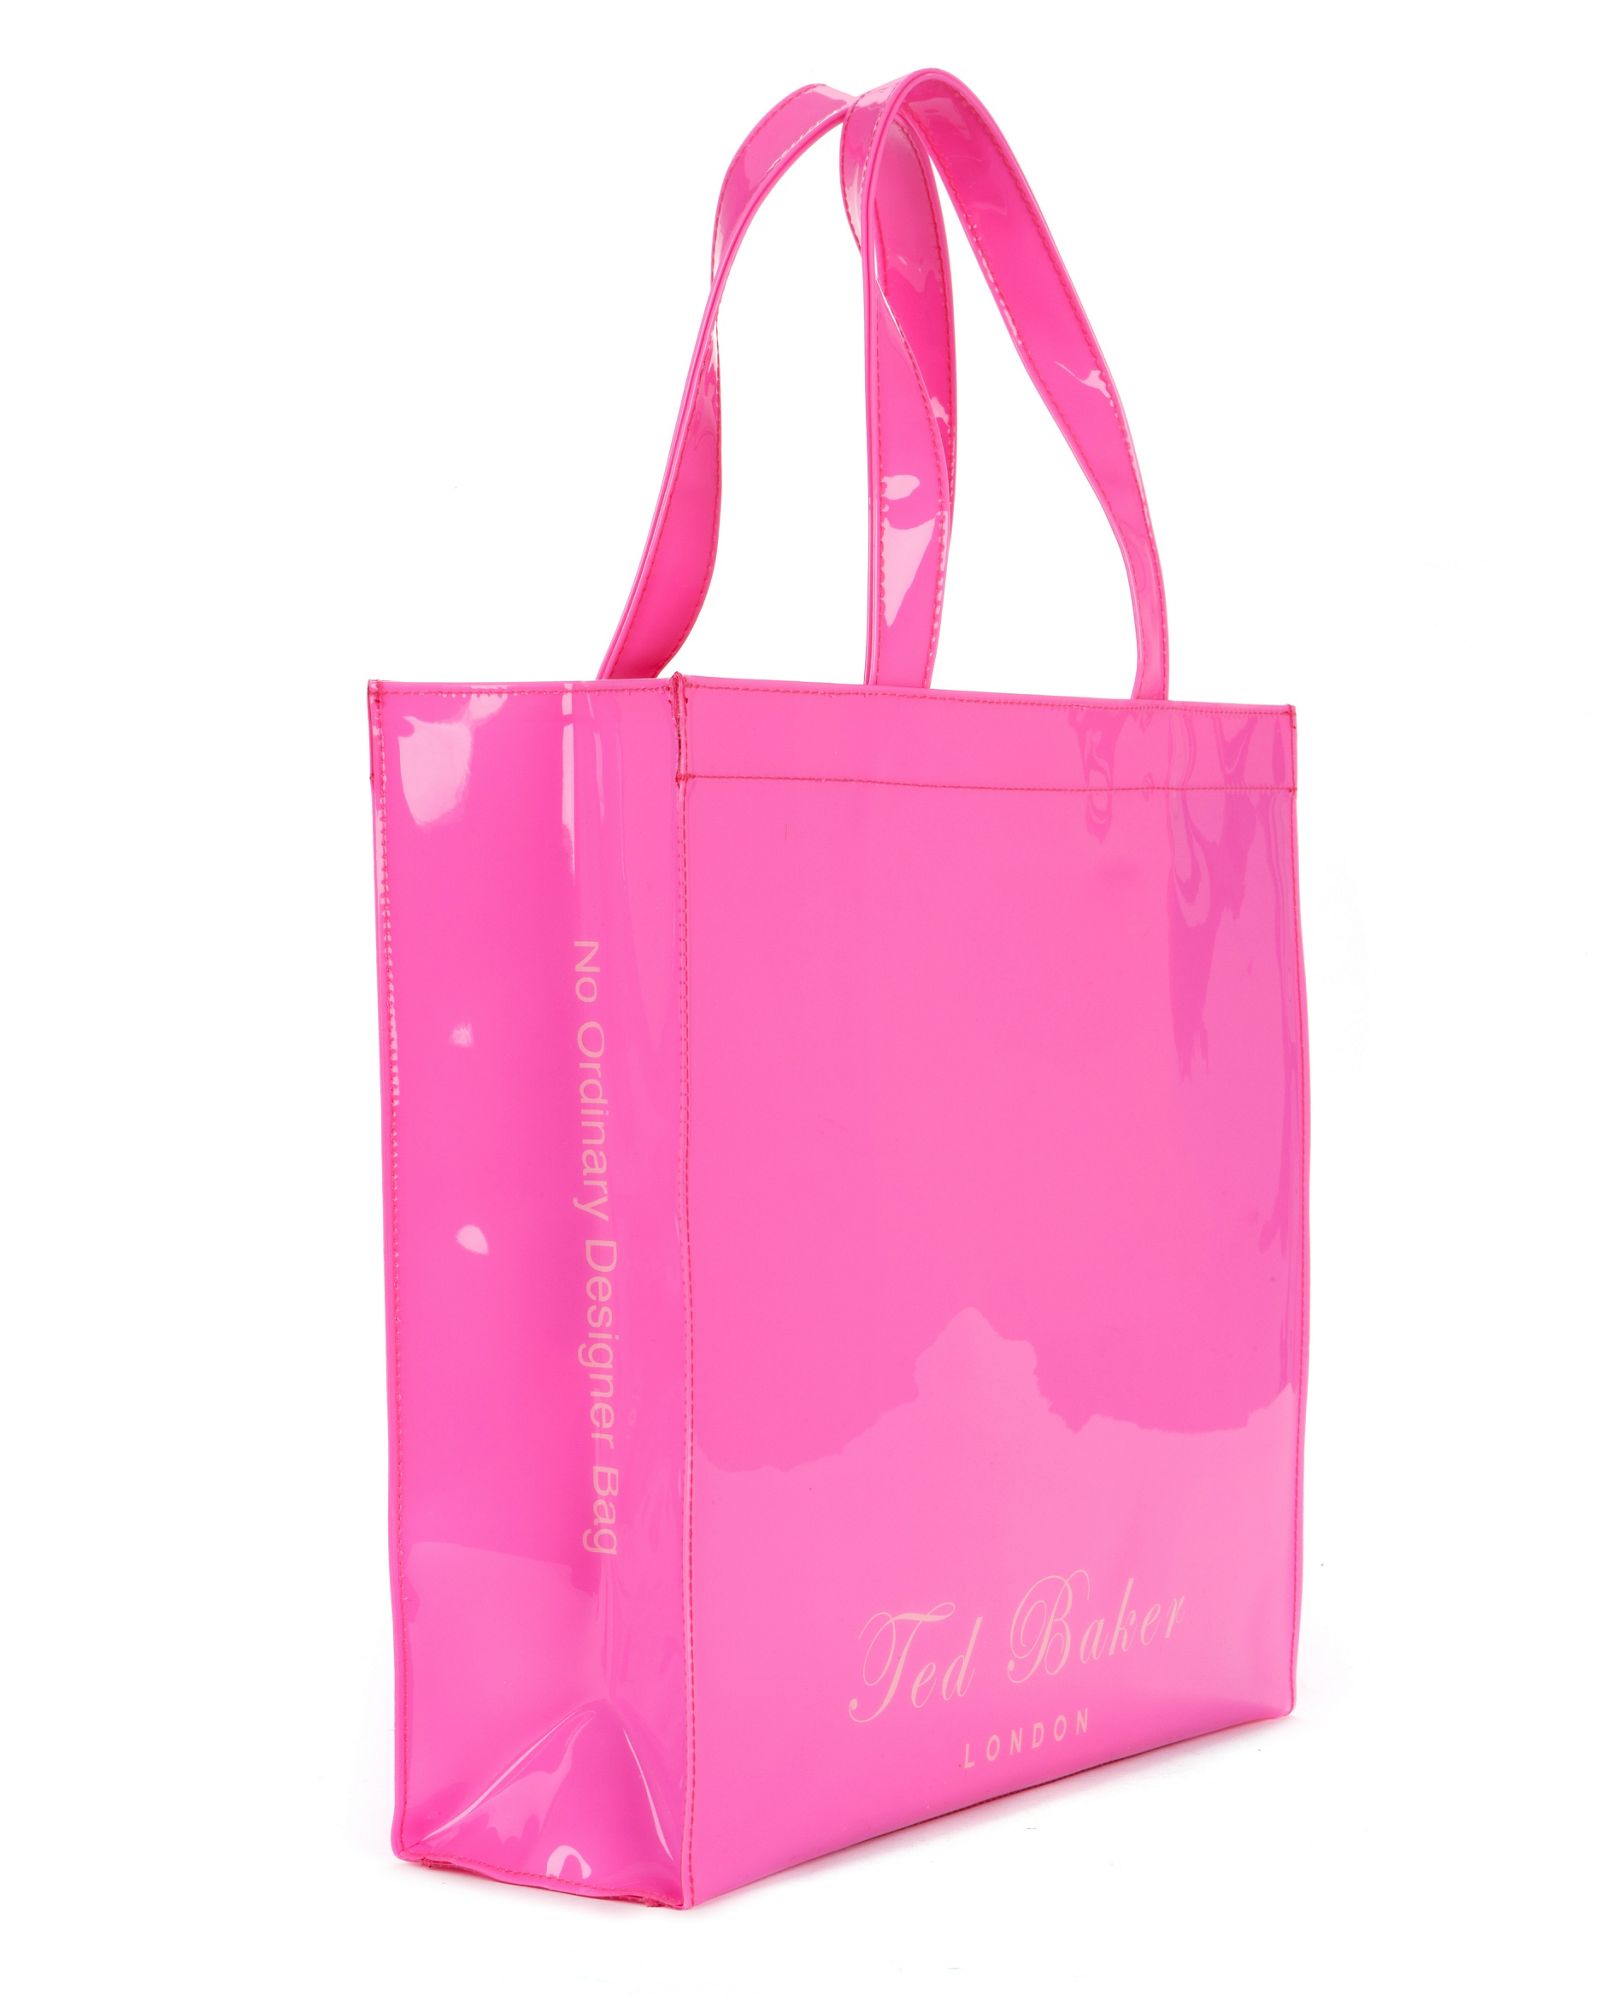 Ted baker Bigcon Bow Shopper Bag in Pink | Lyst